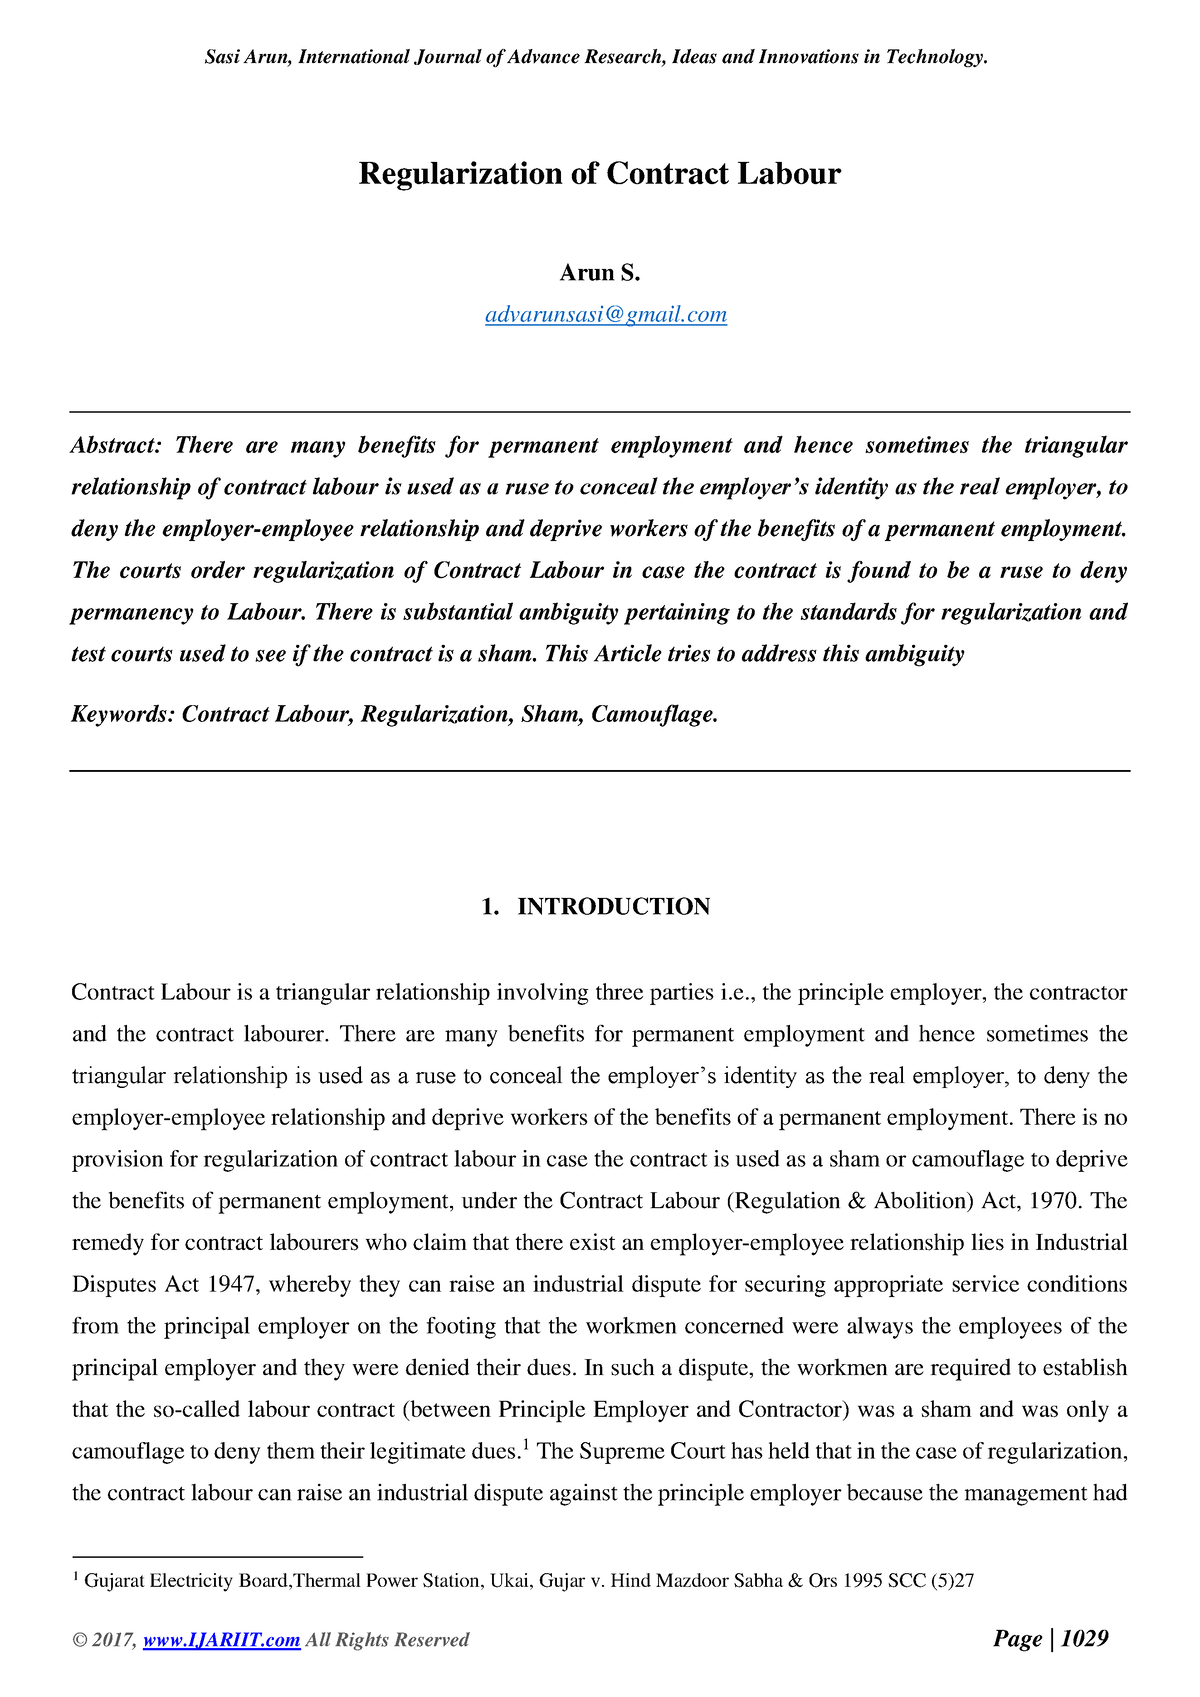 article-regularization-of-contract-labour-regularization-of